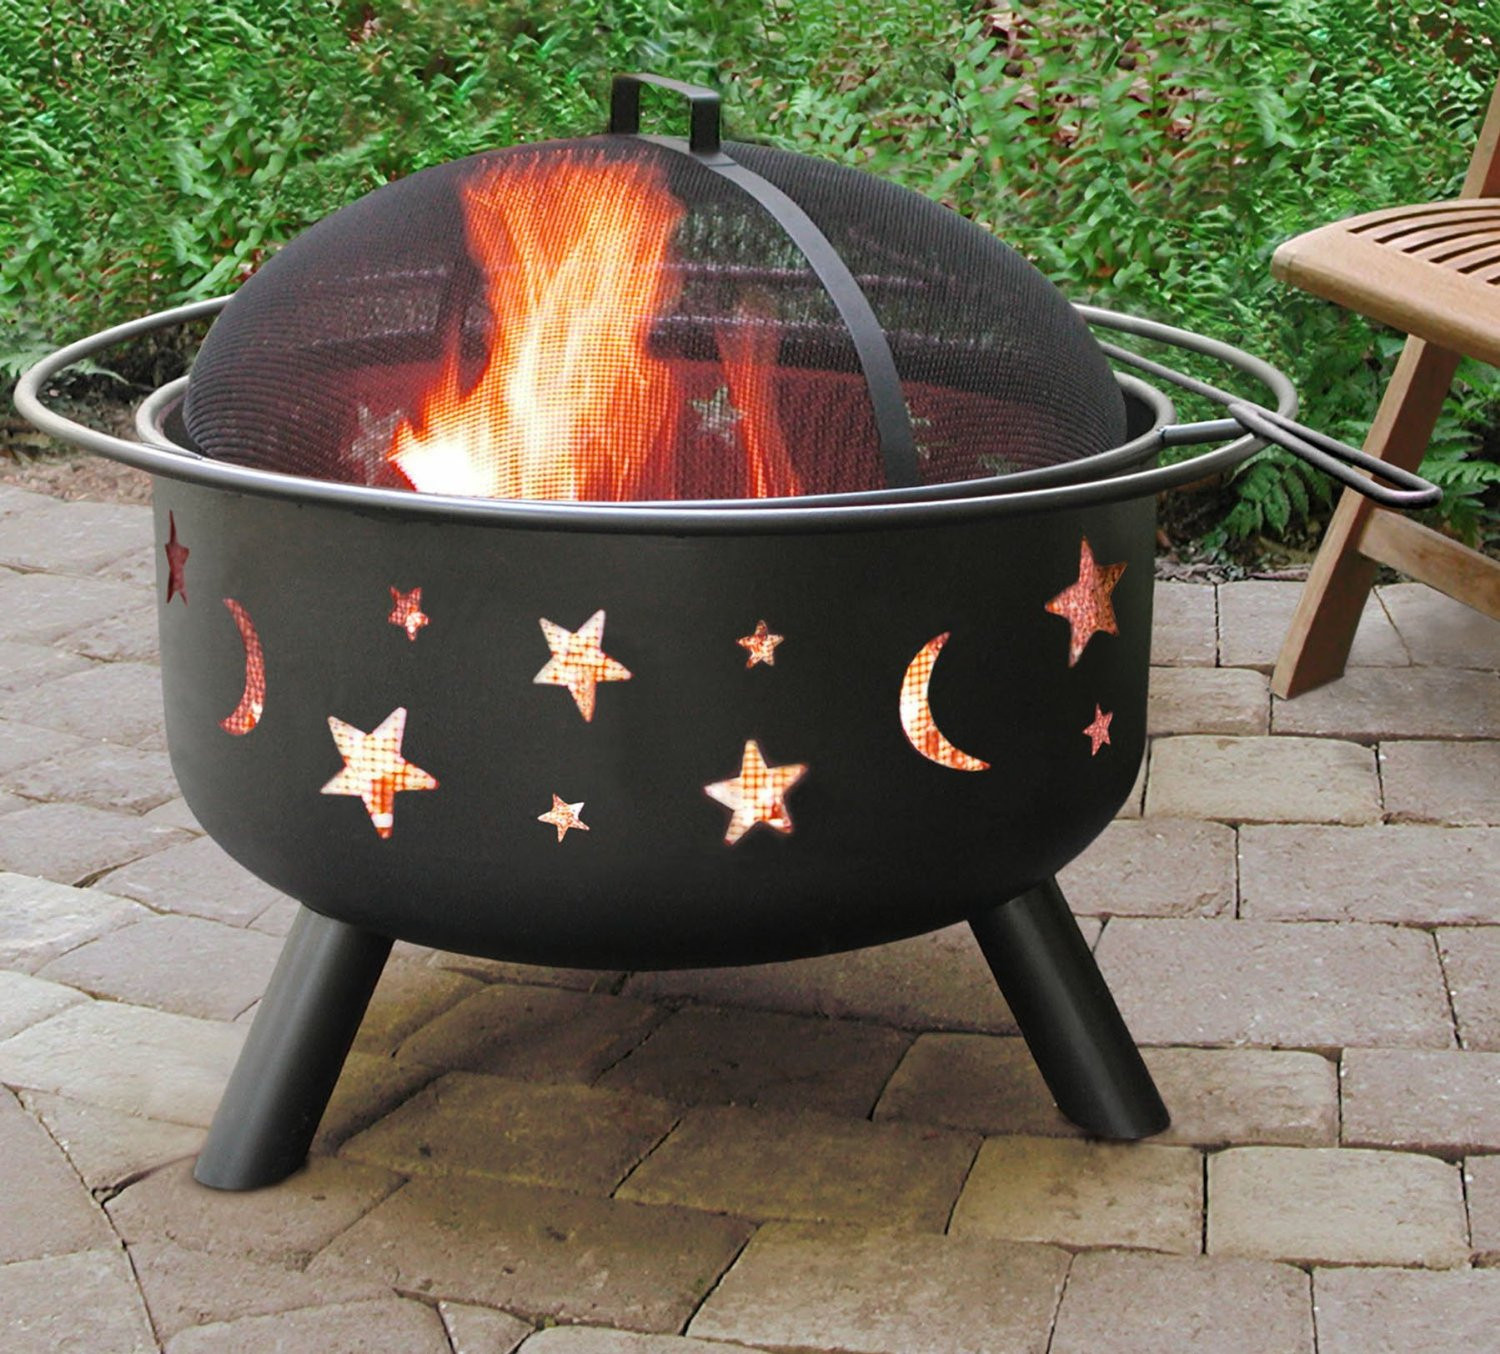 Best Patio Fire Pit
 Top Rated Outdoor Fire Pit Expert Guide